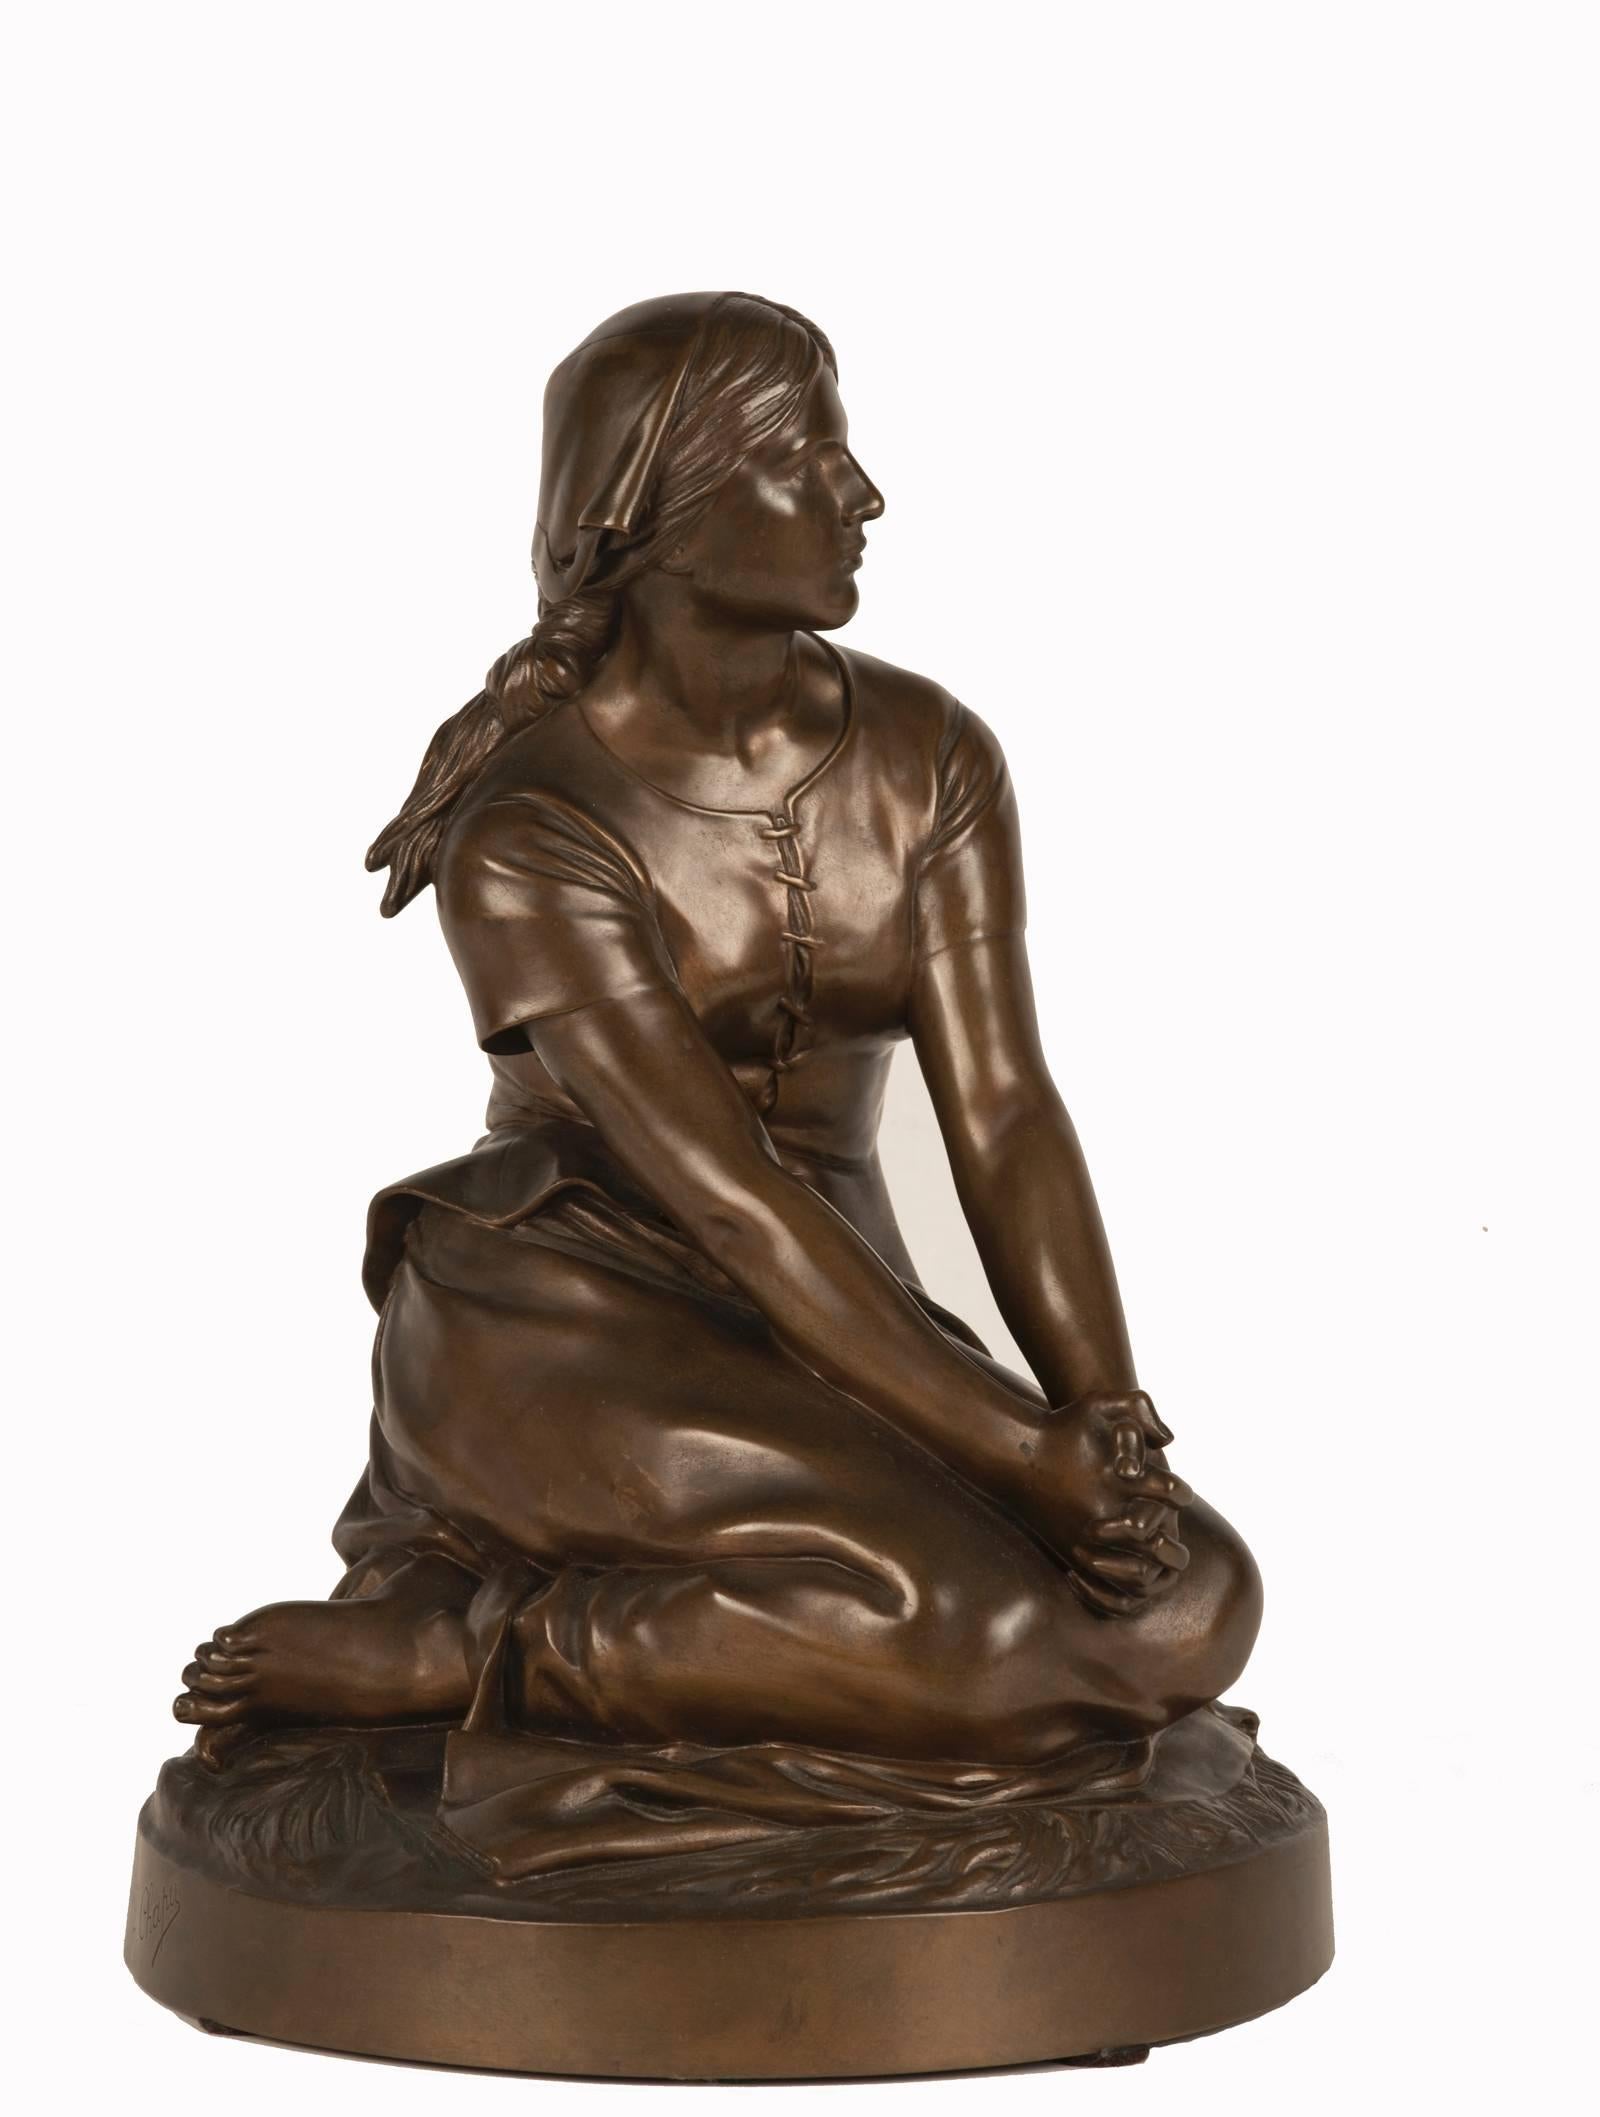 
An elegantly sculpted Joan of Arc, depicted as an unadorned Lorraine shepherdess, sits with her hands clasped in prayer. This simple representation juxtaposes the mythic stature of the heroine as an enduring symbol of French nationalism. Yet it is